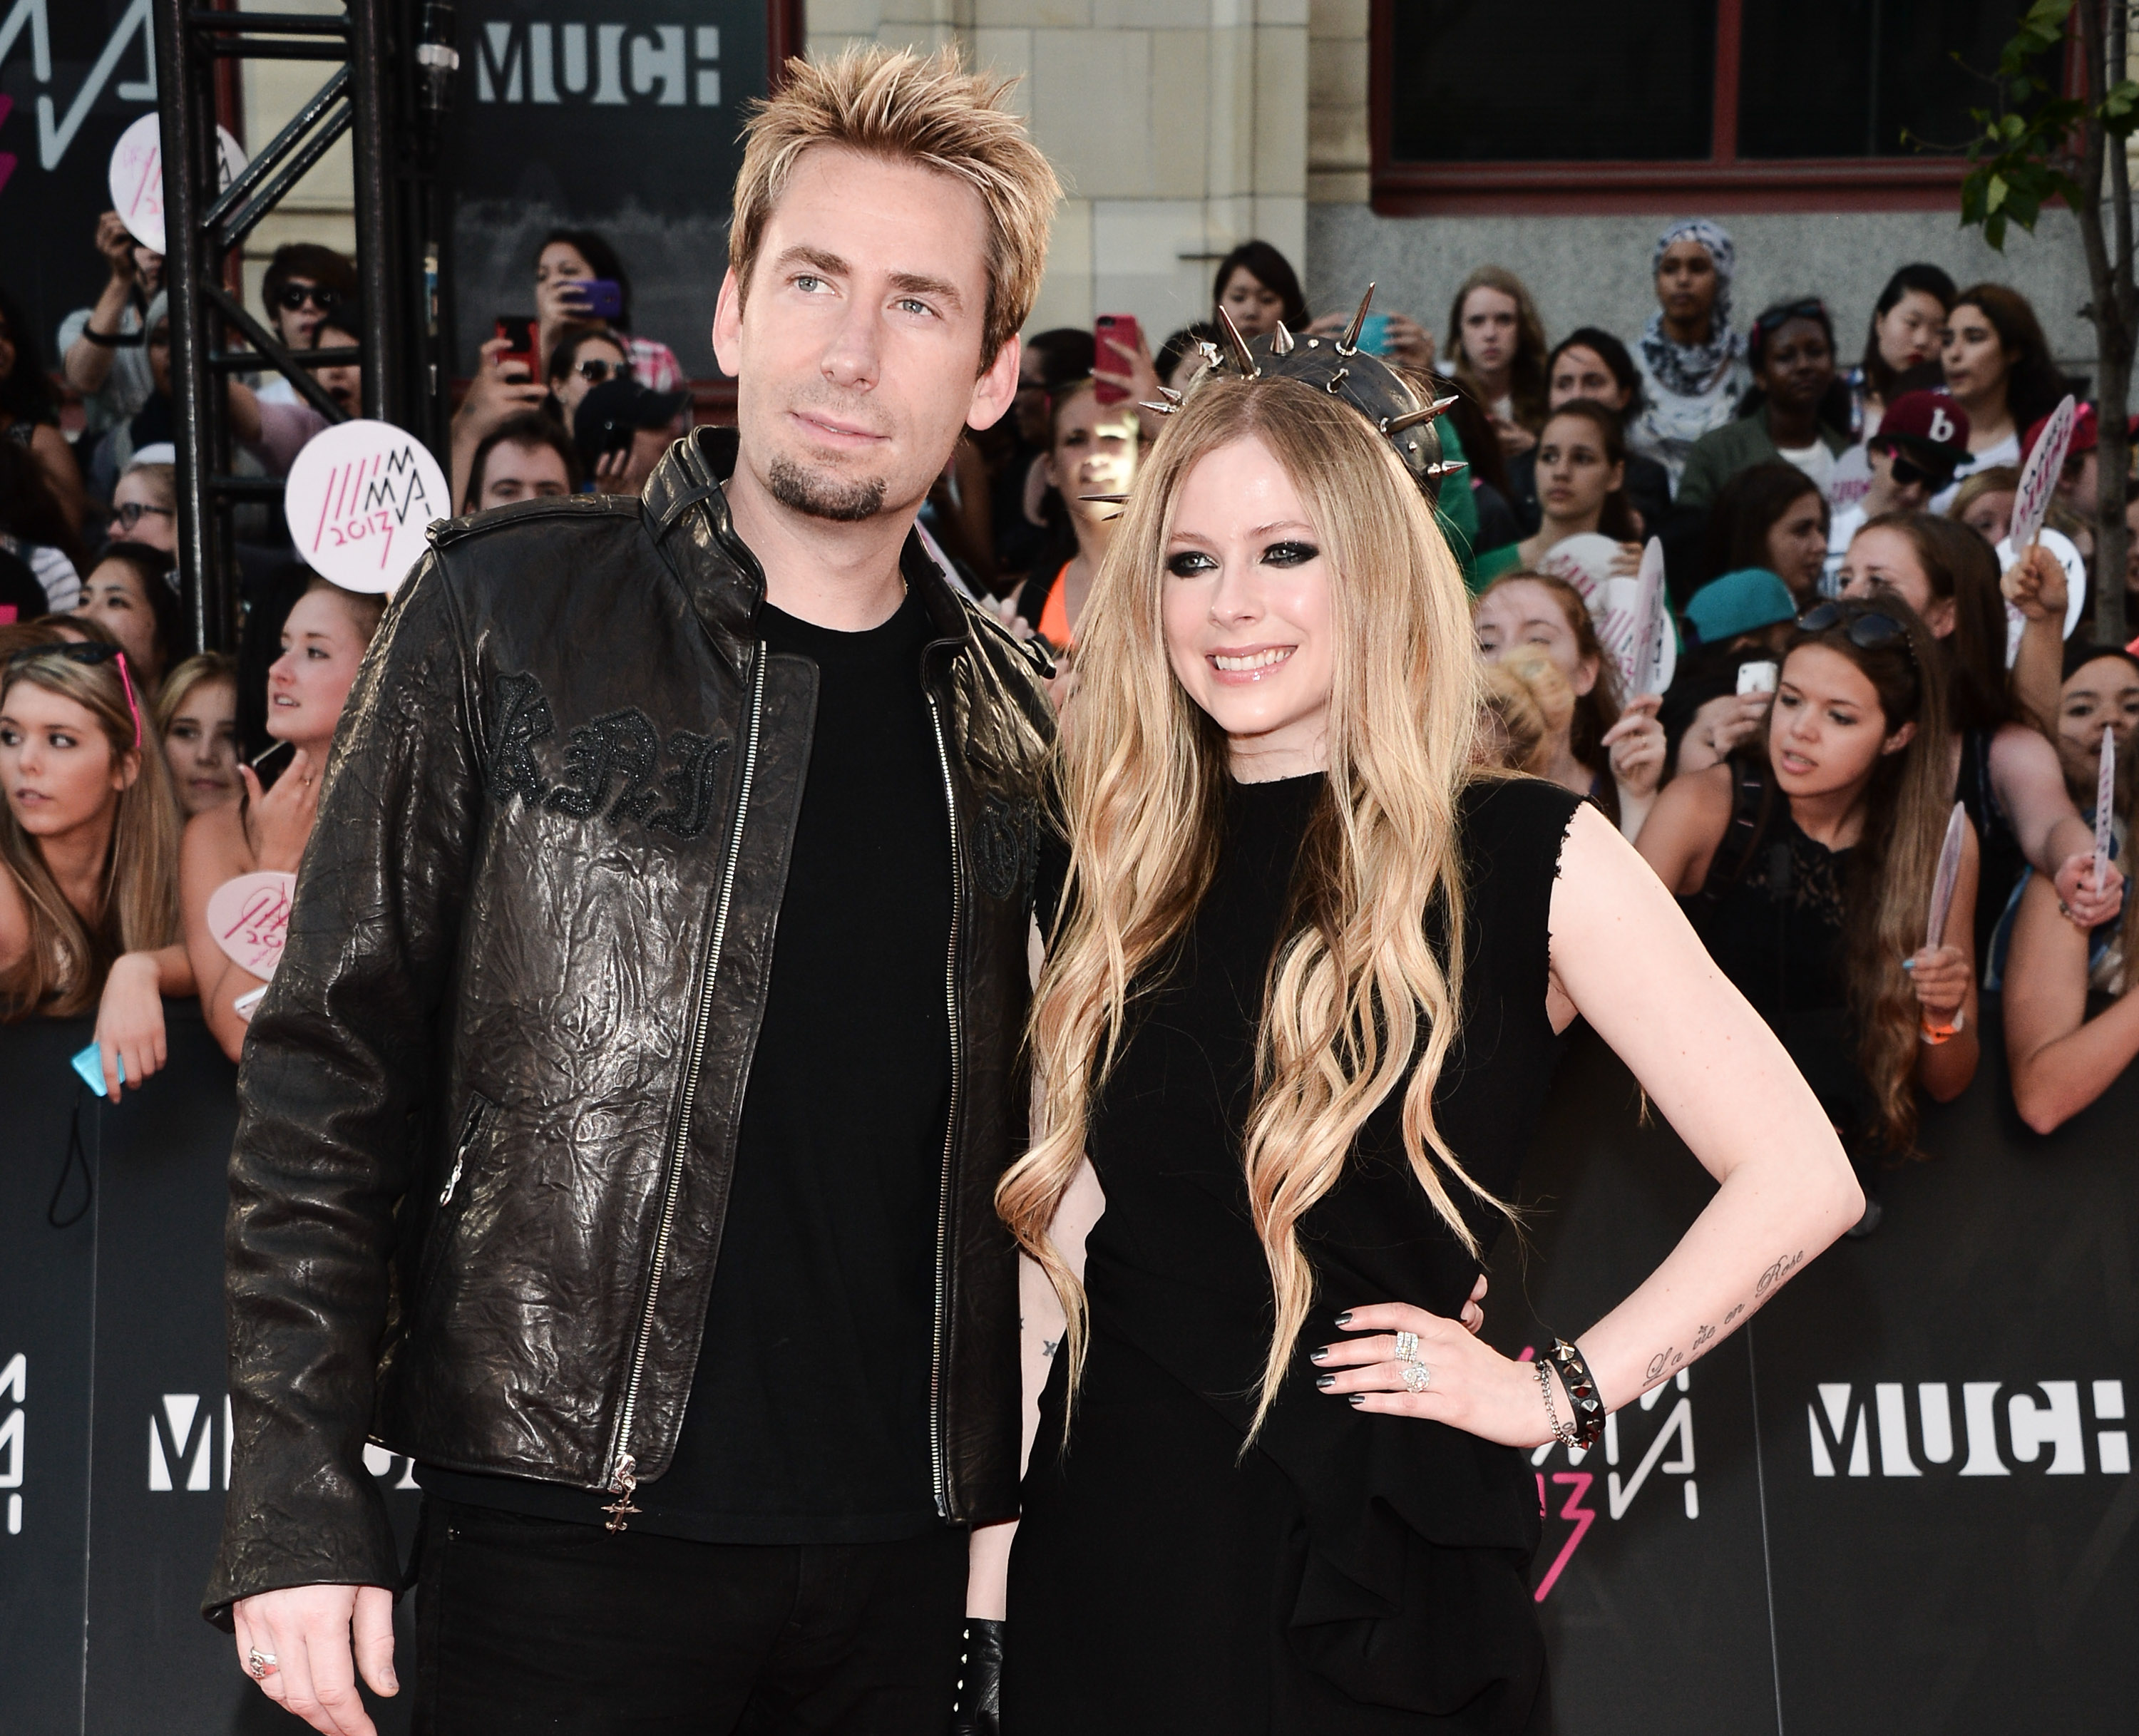 Nickelback's Chad Kroeger with Avril Lavigne in front of a crowd